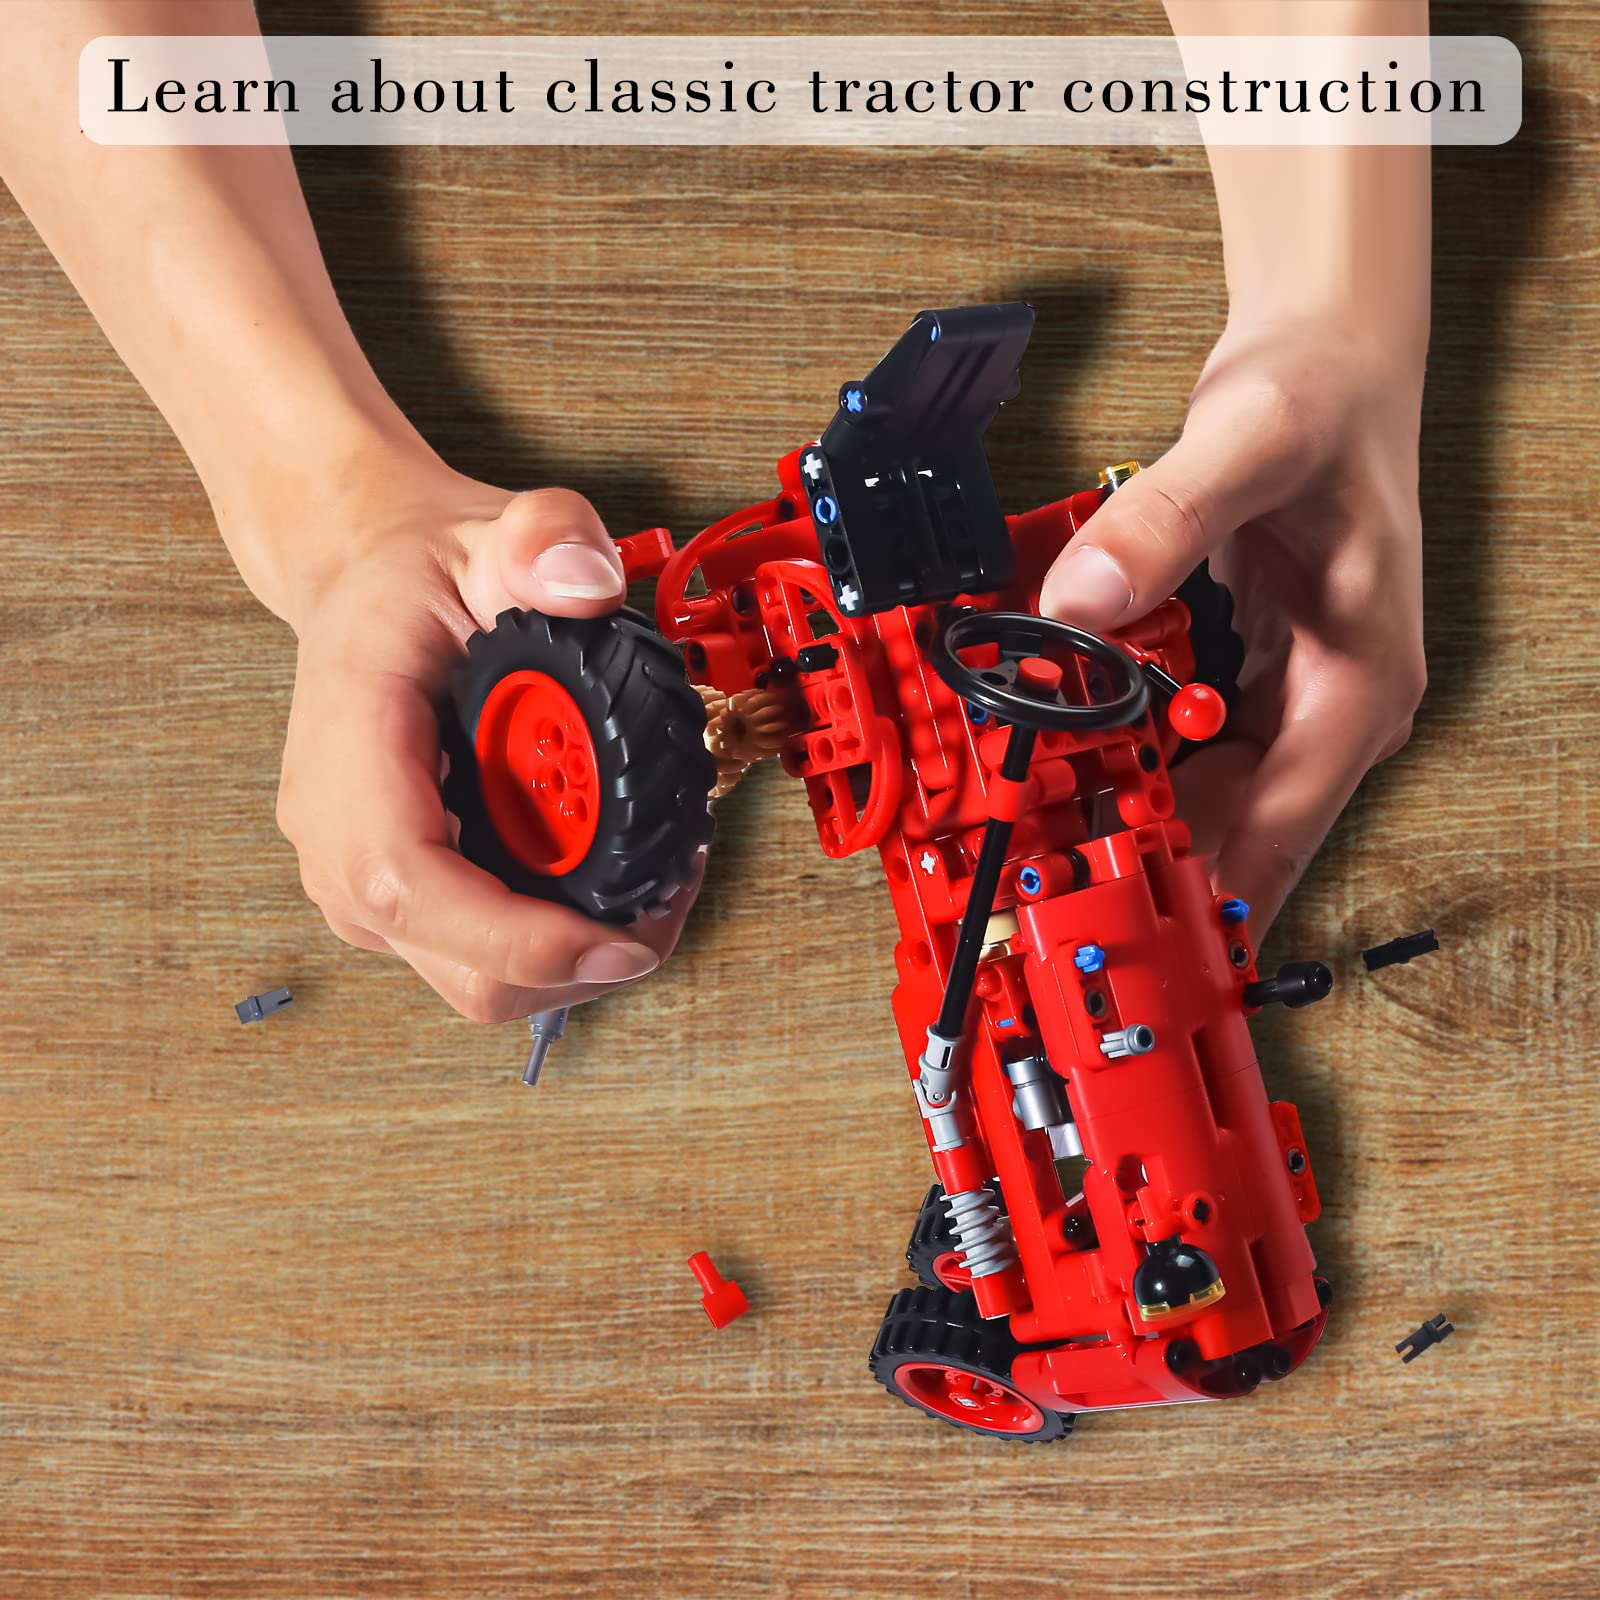 A XINAO TOYS Classic Building Blocks 1/12 Red Tractor Farm Toy Building Set Gift for Kids Ages 6 7 8 9 10 11 12 Includes Shifting Structure, Steering Structure Features (Classic Edition)